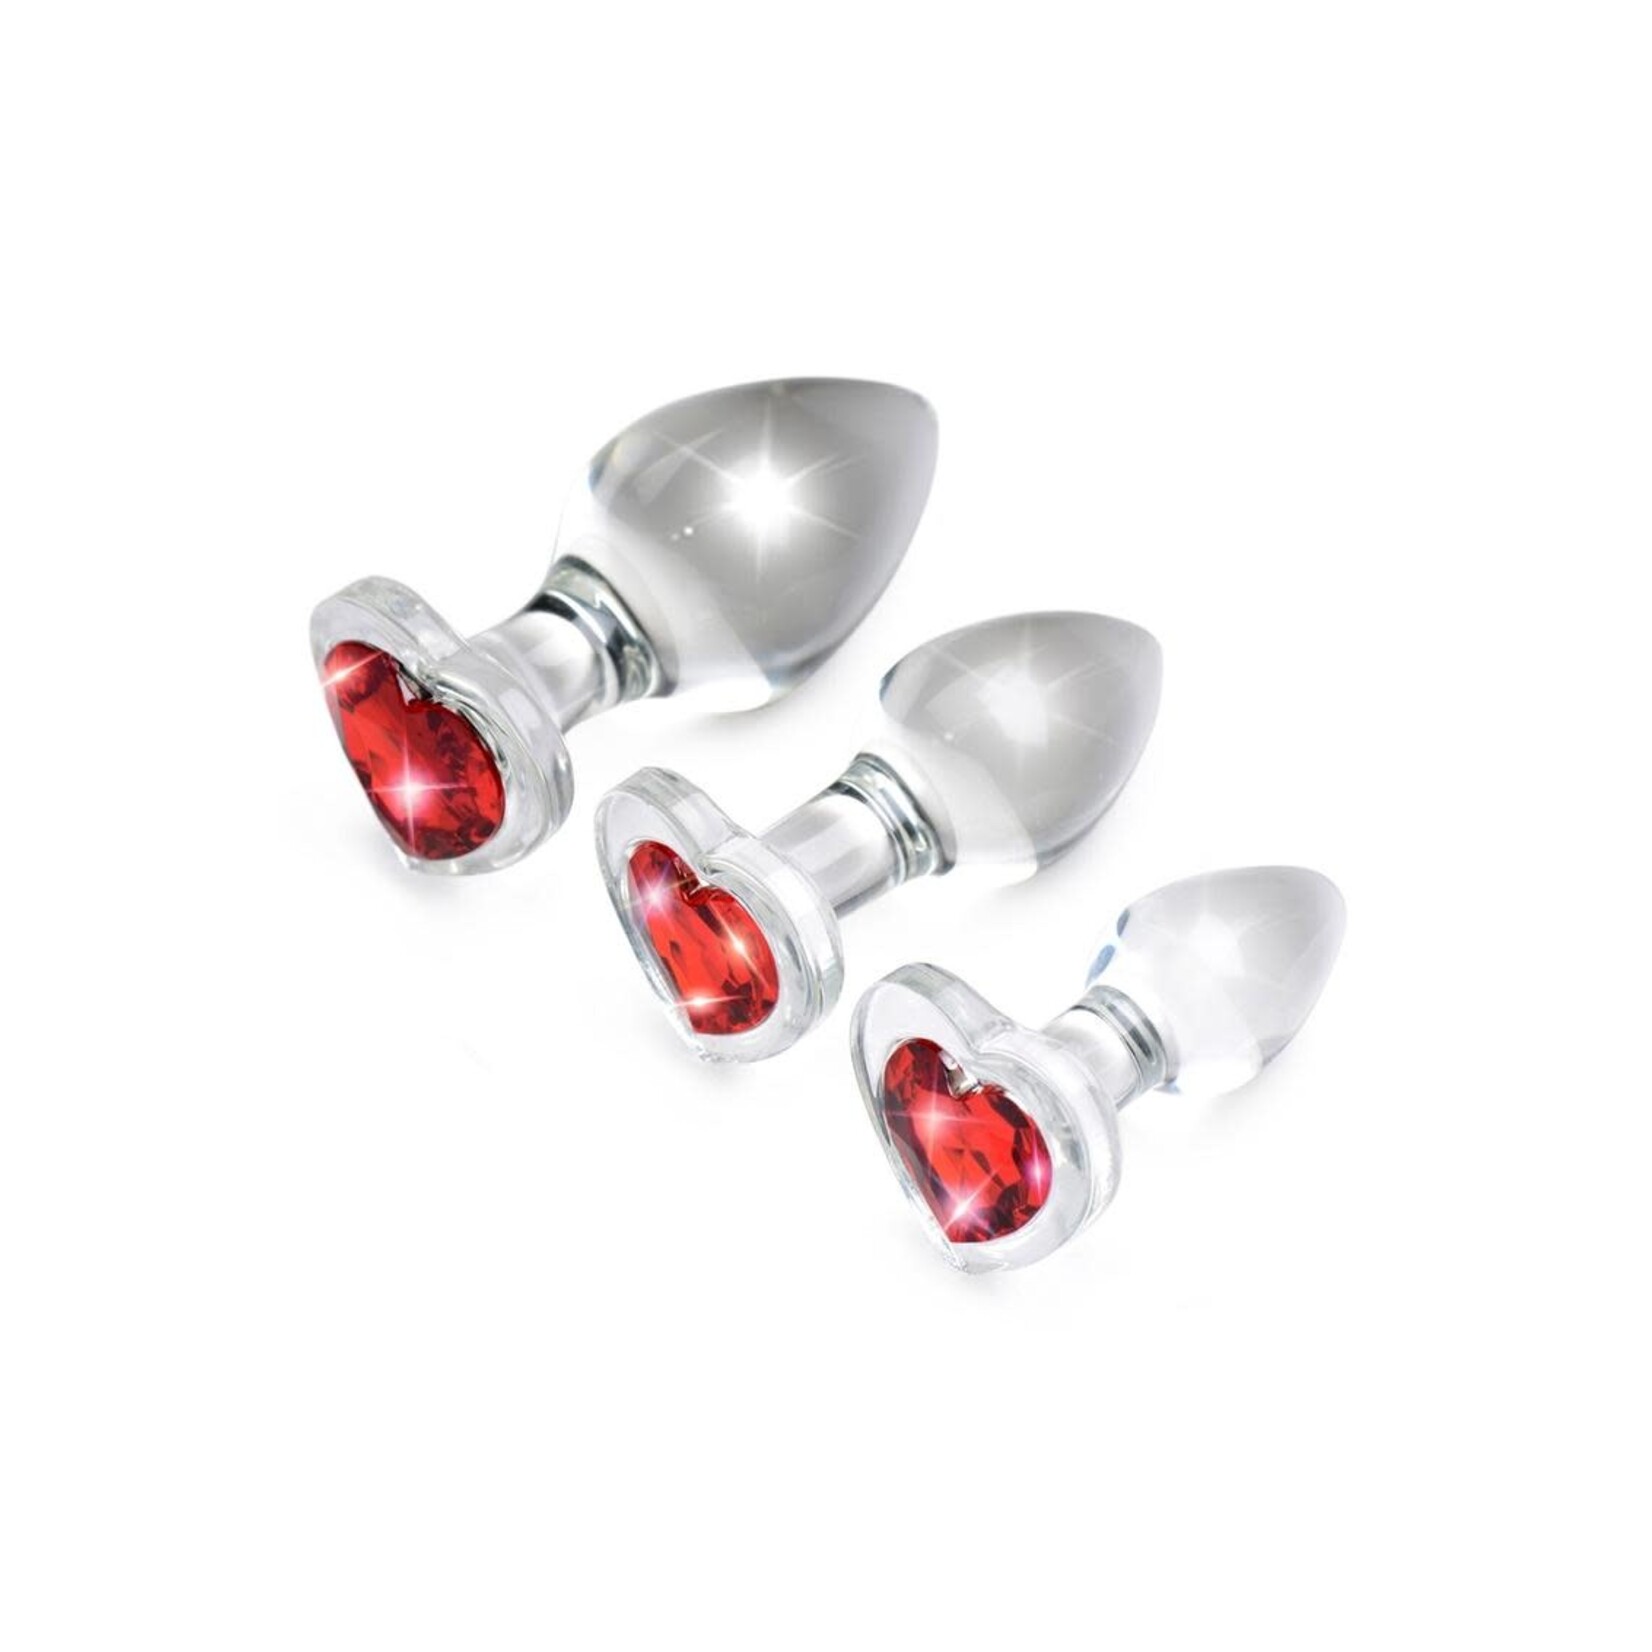 Booty Sparks Red Heart Gem Glass Plug Set 3pc - S/M/L - Red/Clear